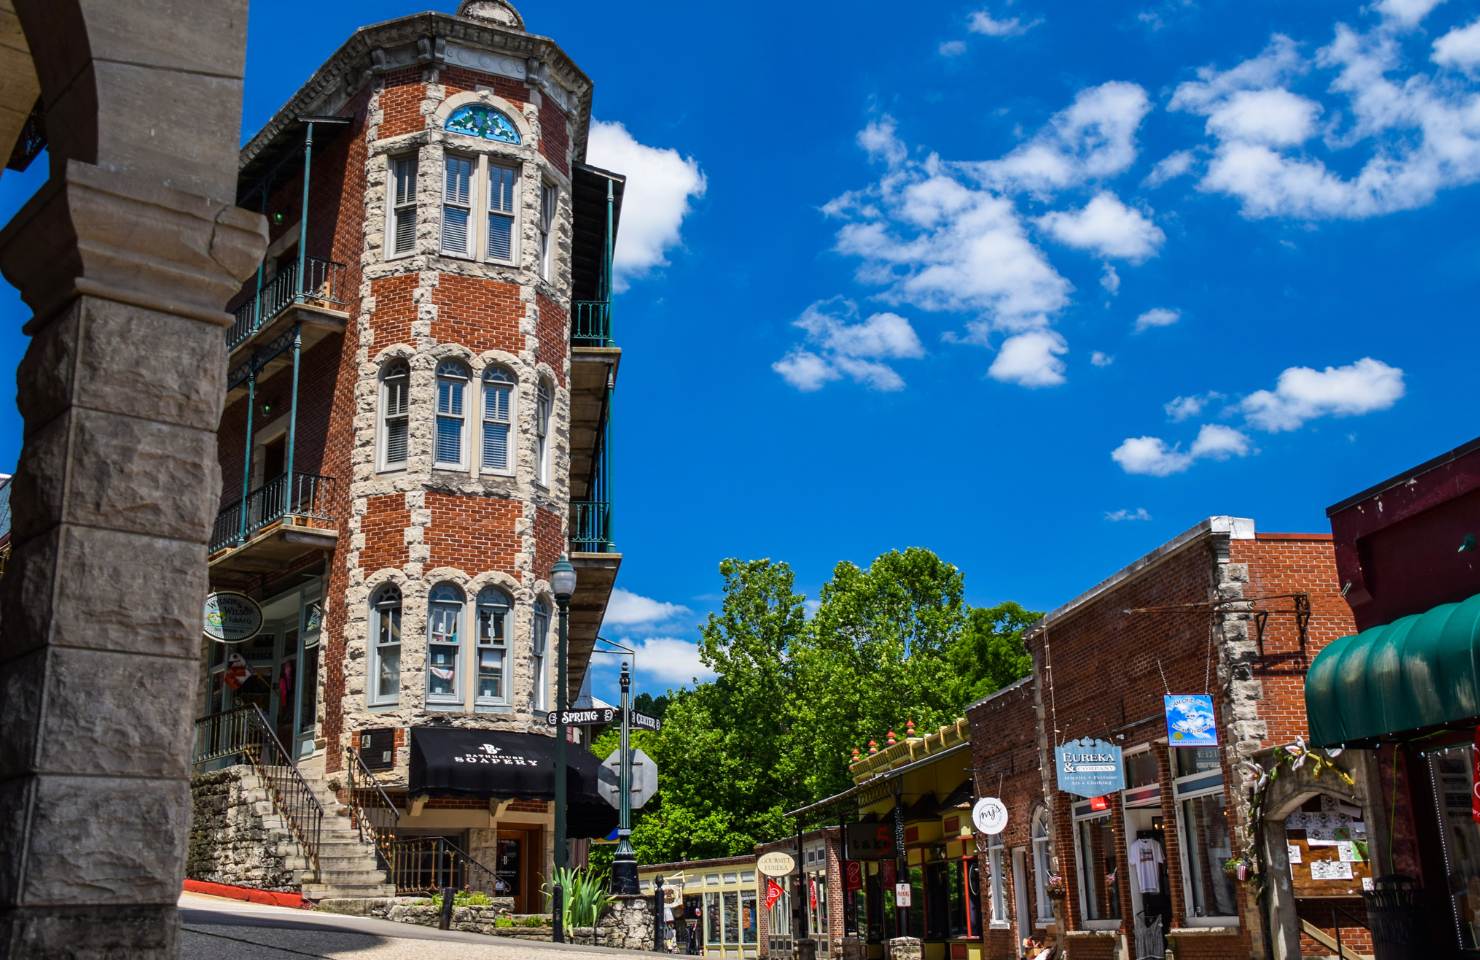 eureka springs, one of the most romantic destinations in the us